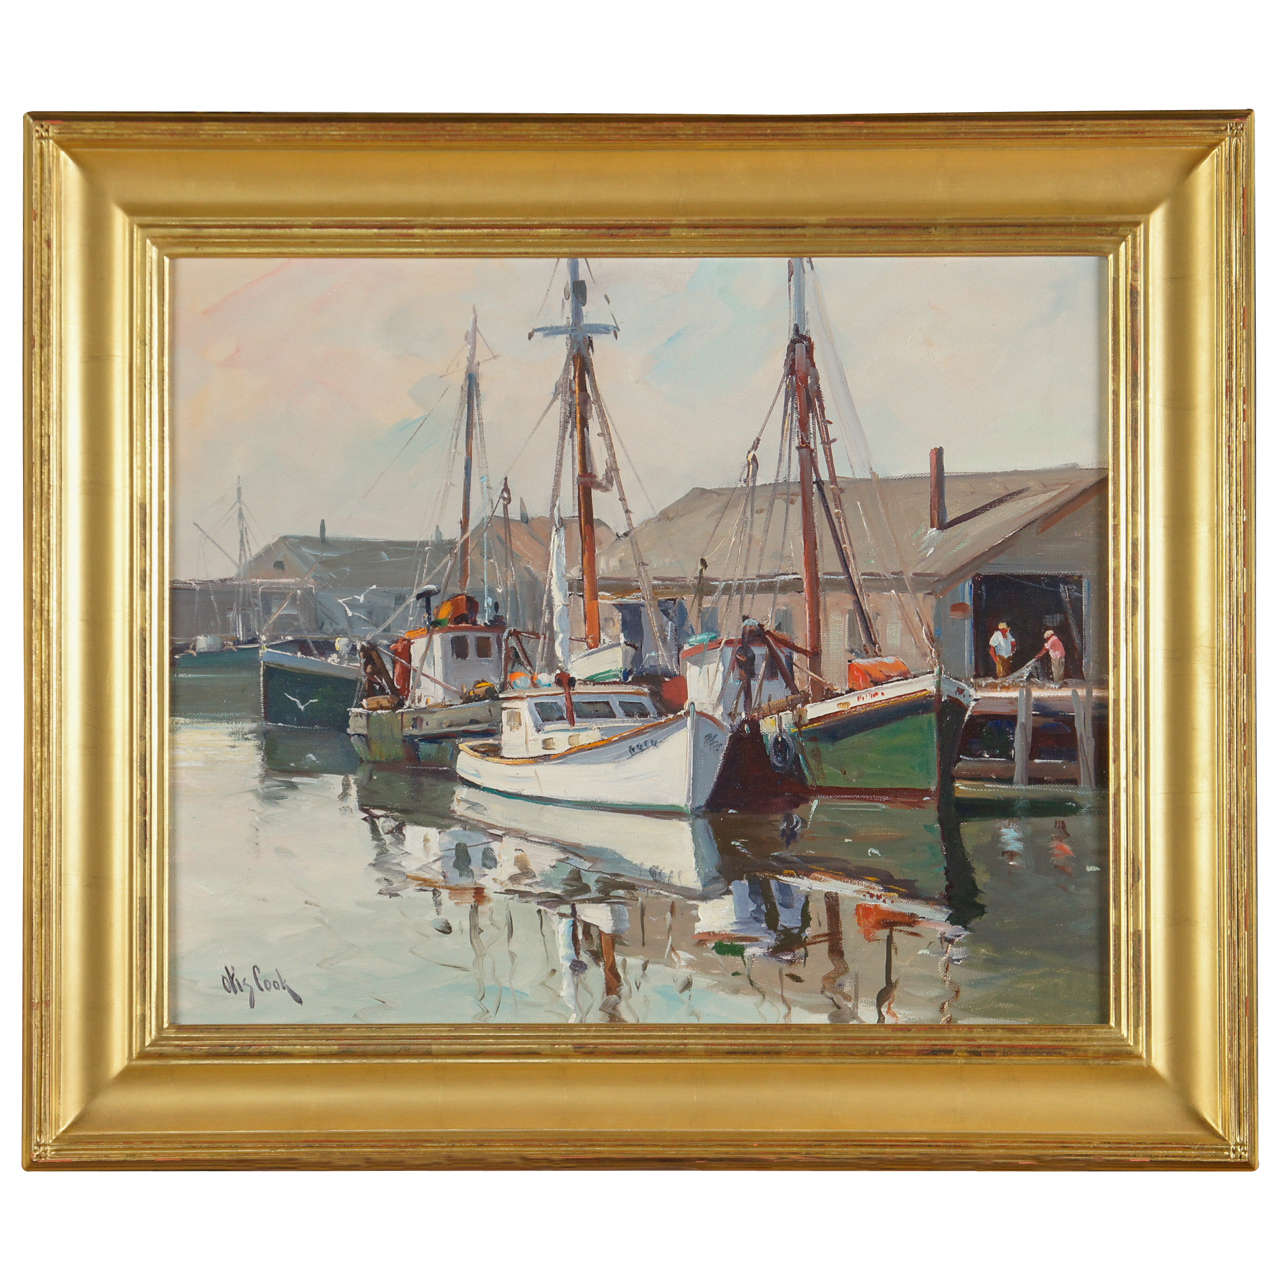 American Oil on Canvas, "Gloucester Harbor" by Otis Cook